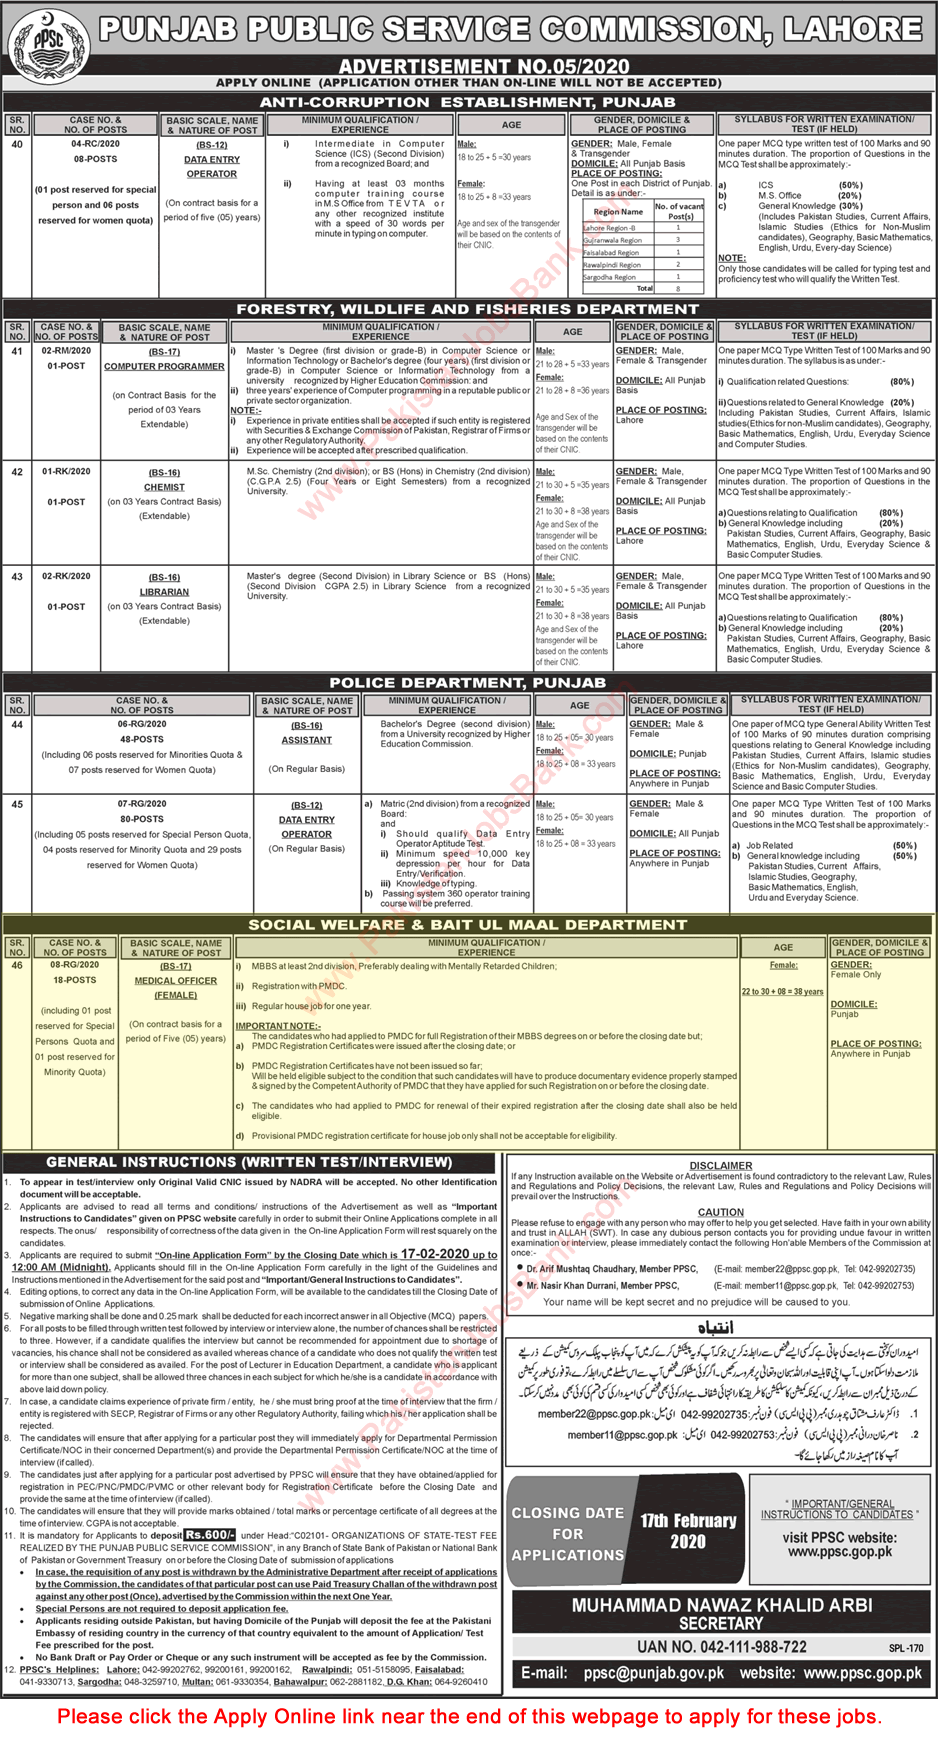 Medical Officer Jobs in Social Welfare and Bait ul Maal Department Punjab 2020 February PPSC Apply Online Latest